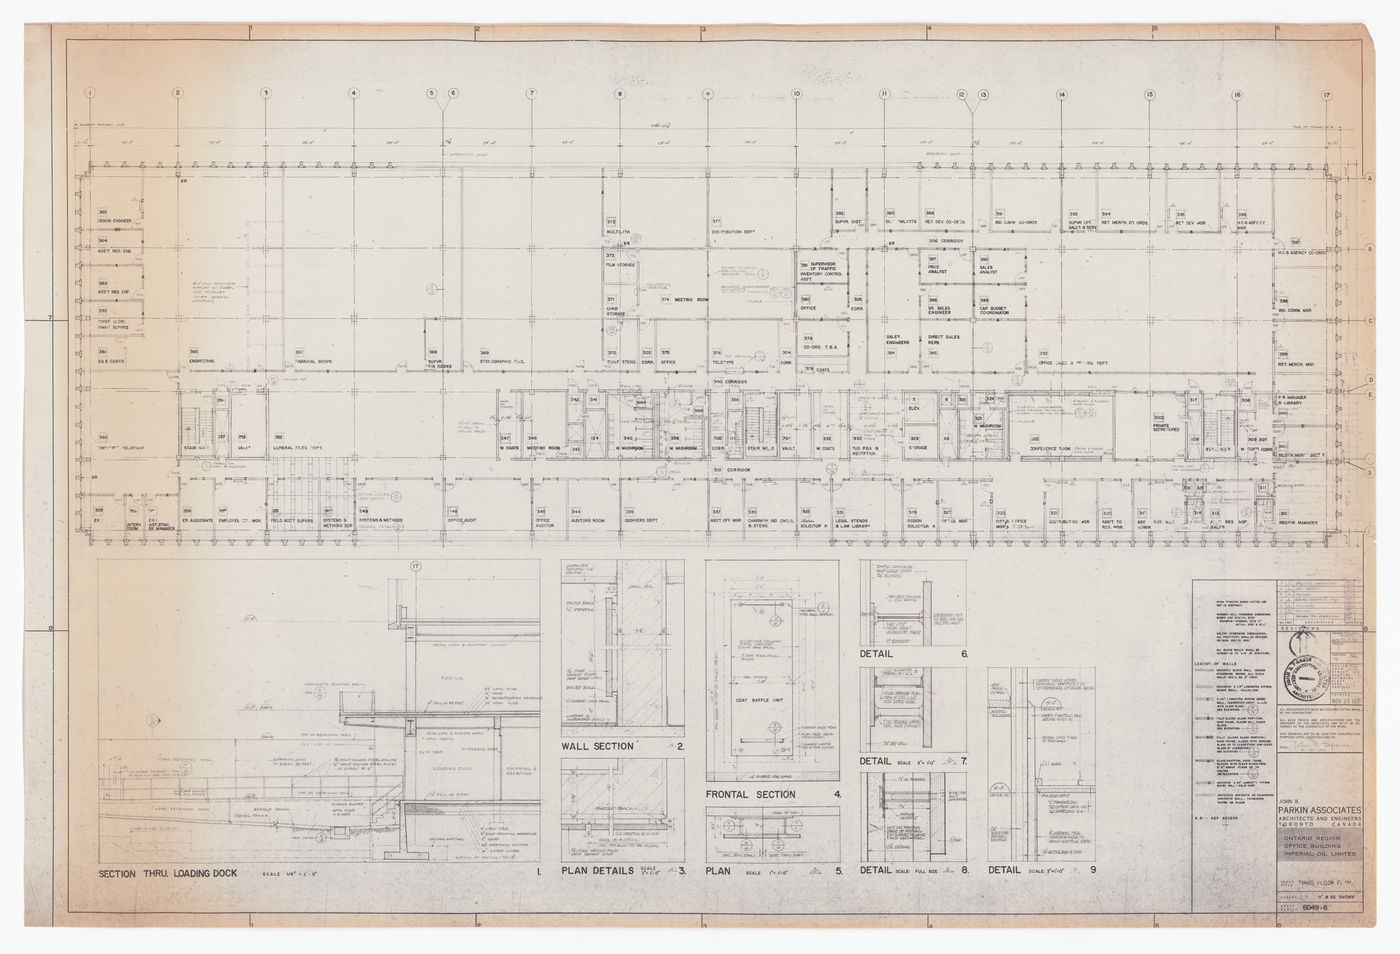 Construction third floor plan and details for Imperial Oil Limited, Ontario Region Office Building, North York